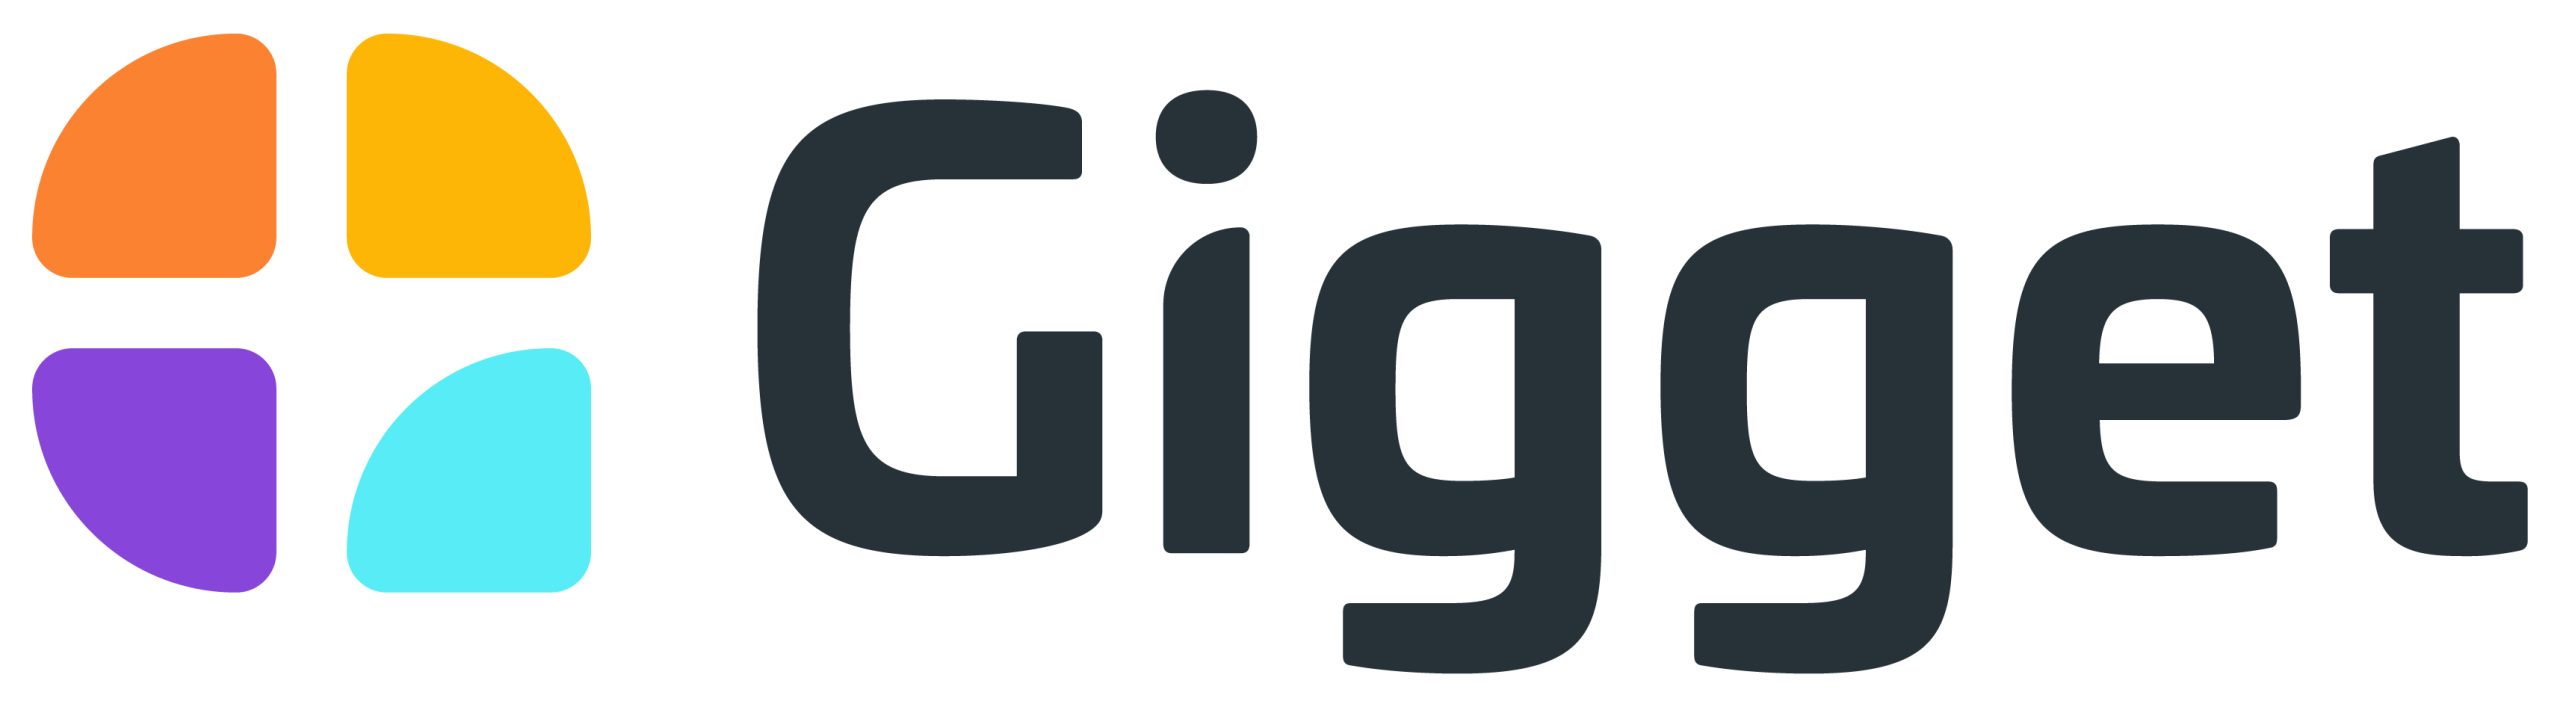 Gigget.co.uk